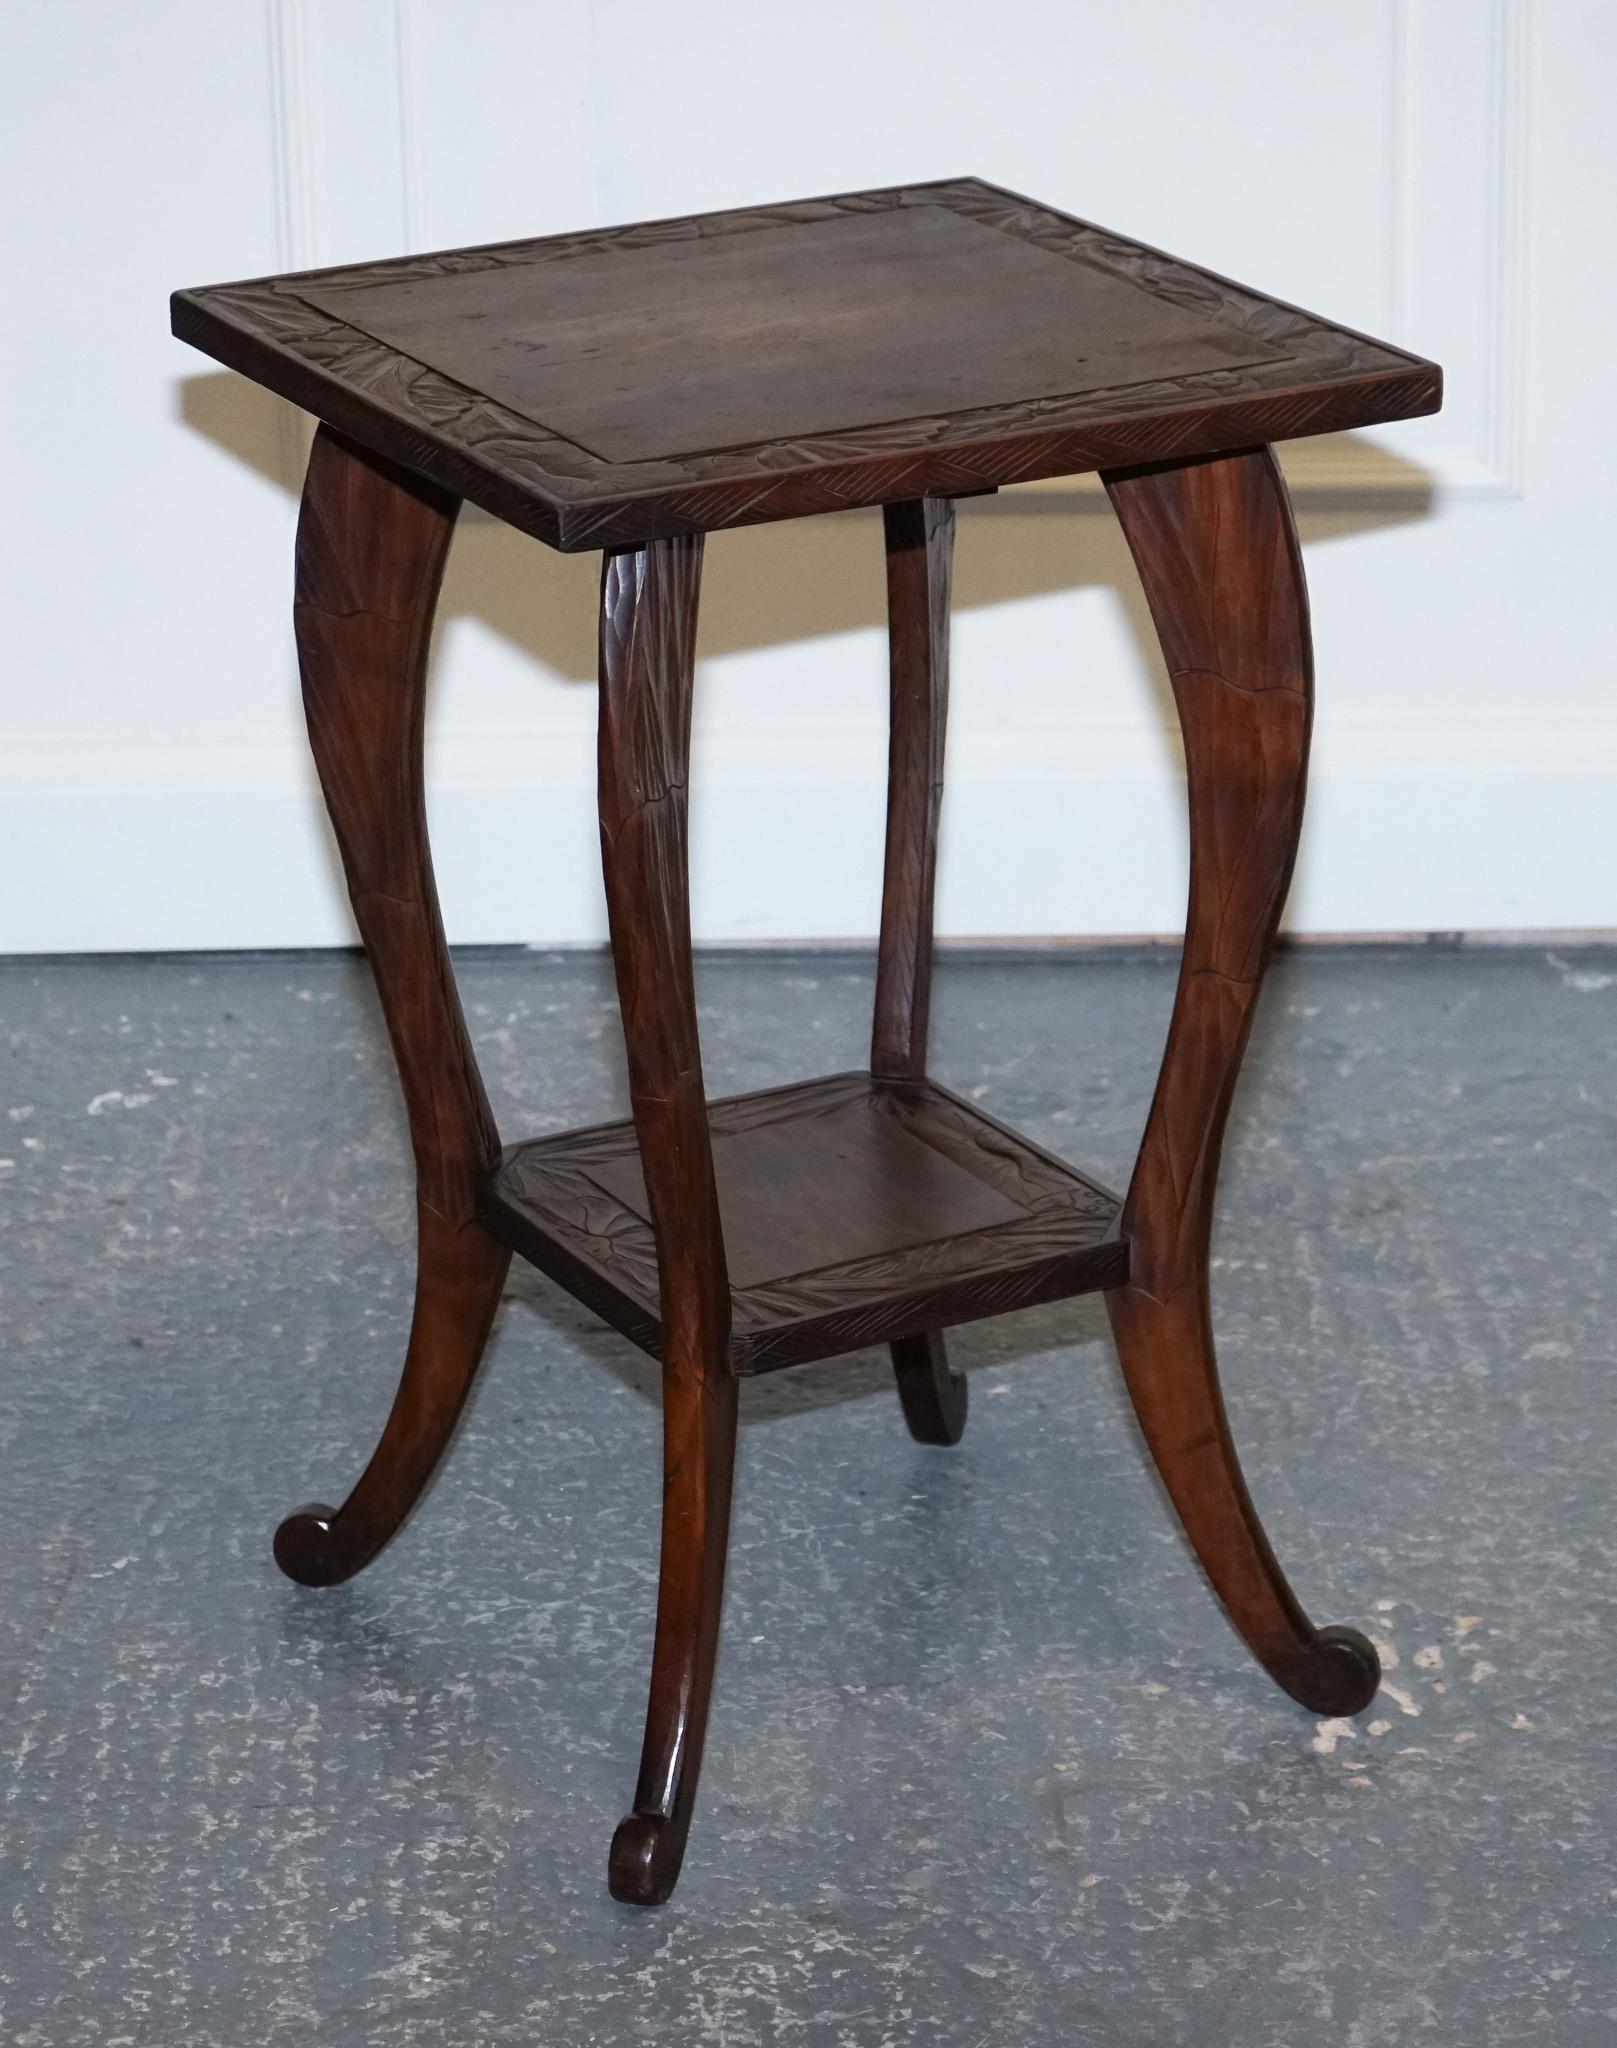 
We are delighted to offer for sale this Stunning 1950s Liberty's Oak Table.

This Liberty's London 1950's hand-carved occasional side table is a true masterpiece of craftsmanship. The table is made from high-quality, solid wood, and has been